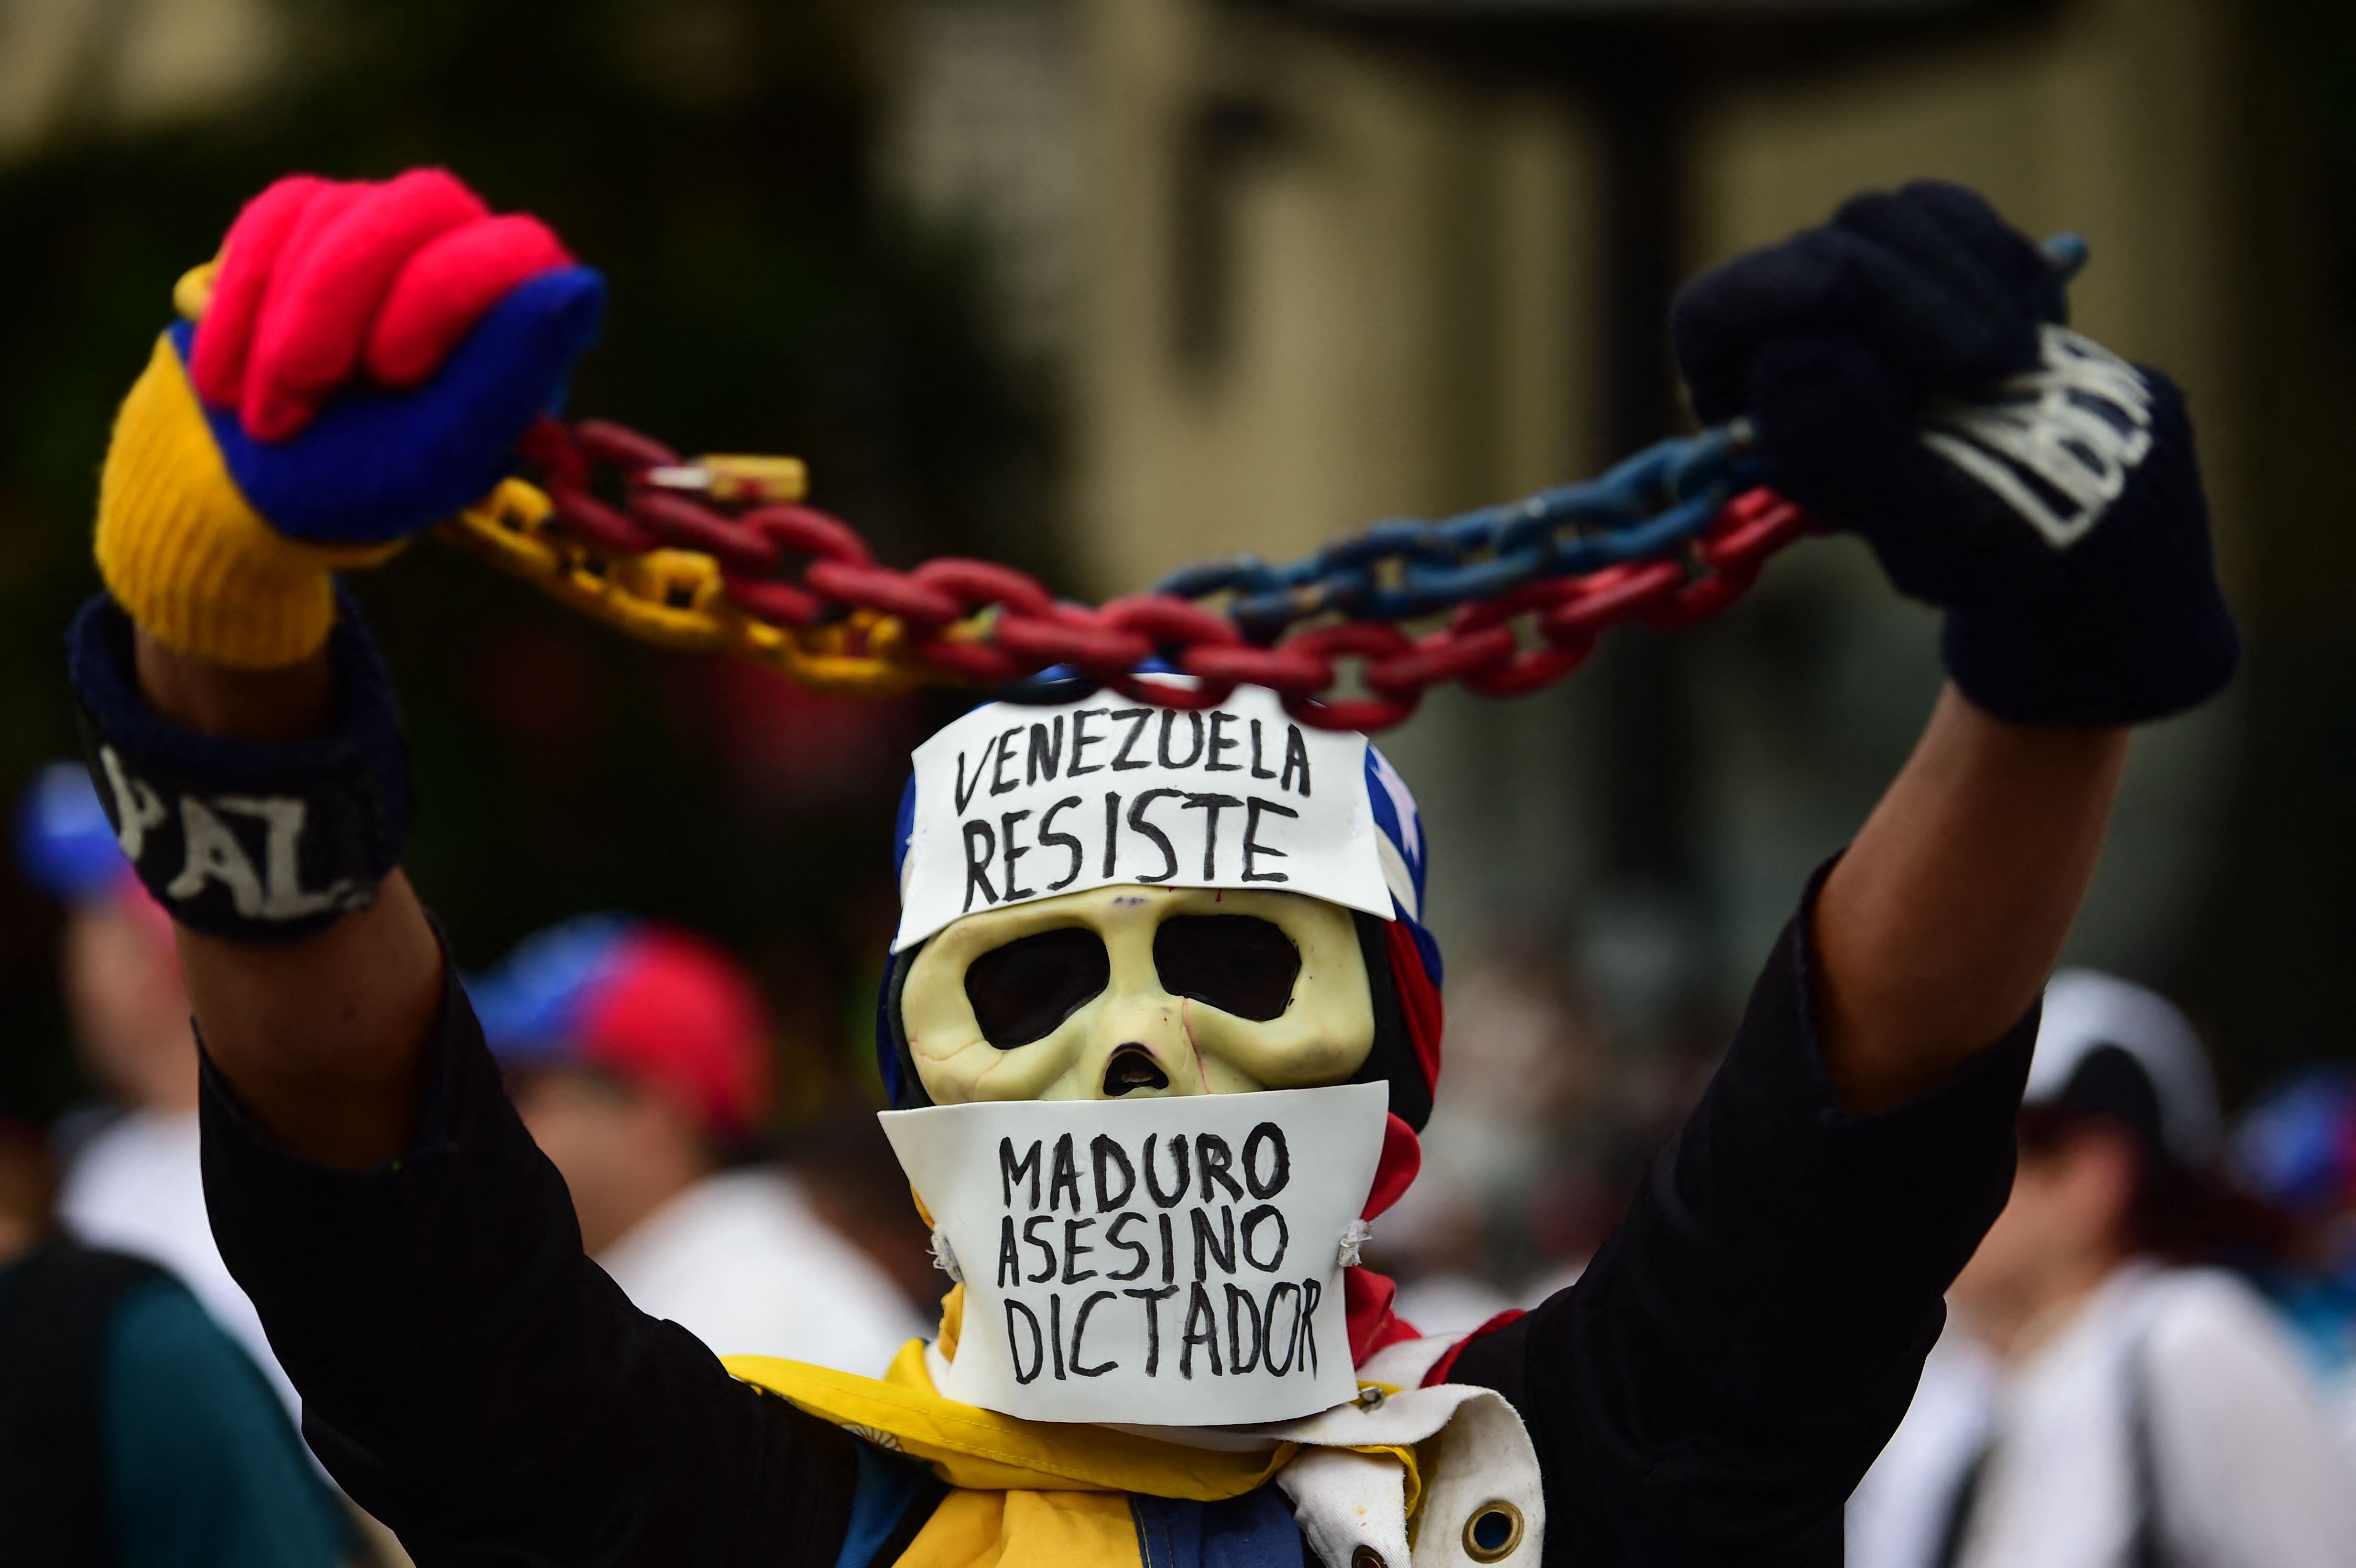 An opposition activist takes part in a march against President Nicolás Maduro in Caracas, on May 1, 2017. (Photo by RONALDO SCHEMIDT/AFP).